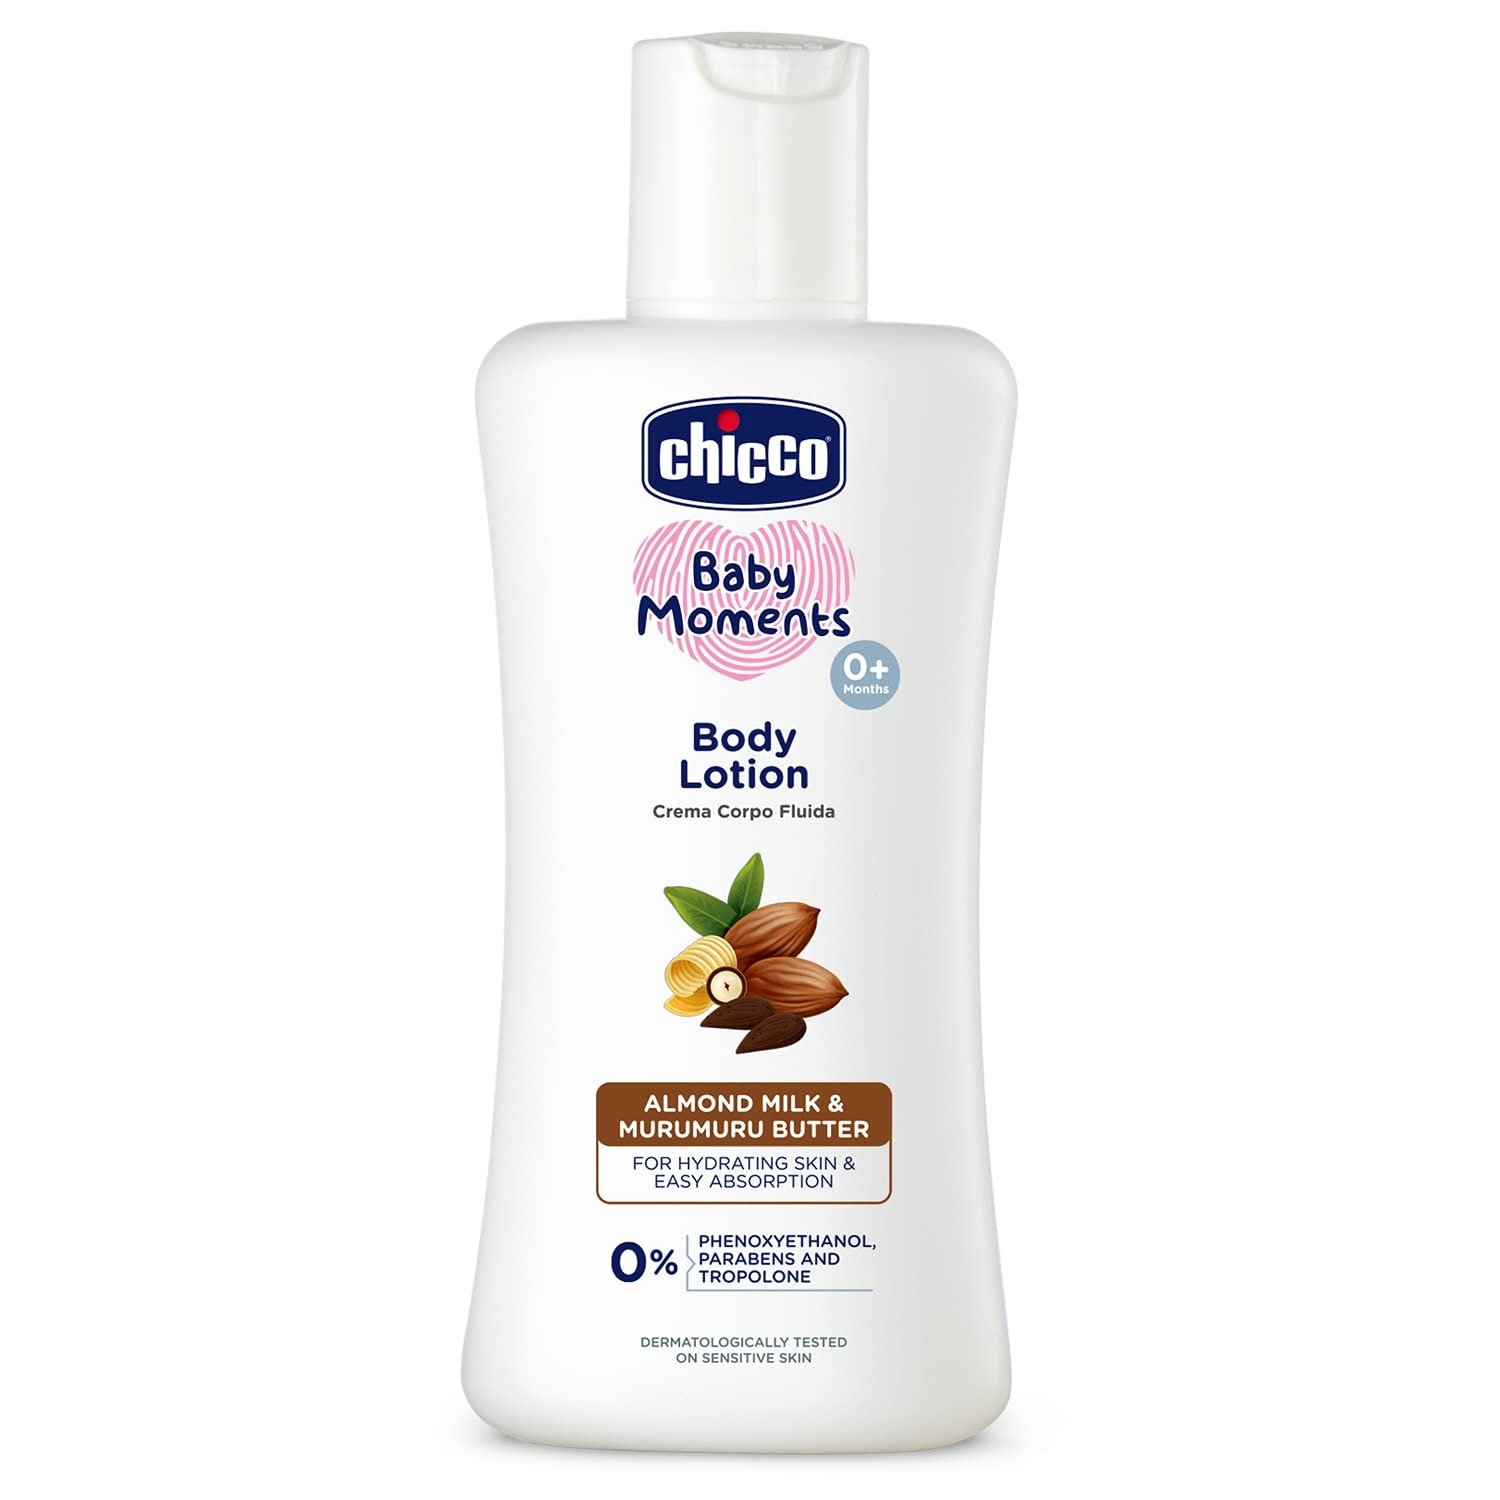 Chicco Baby Moments Body Lotion, New Advanced formula with Natural Ingredients for Daily Moisturization, Suitable for Baby’s moisturized skin, No Phenoxyethanol and Parabens (100ml)